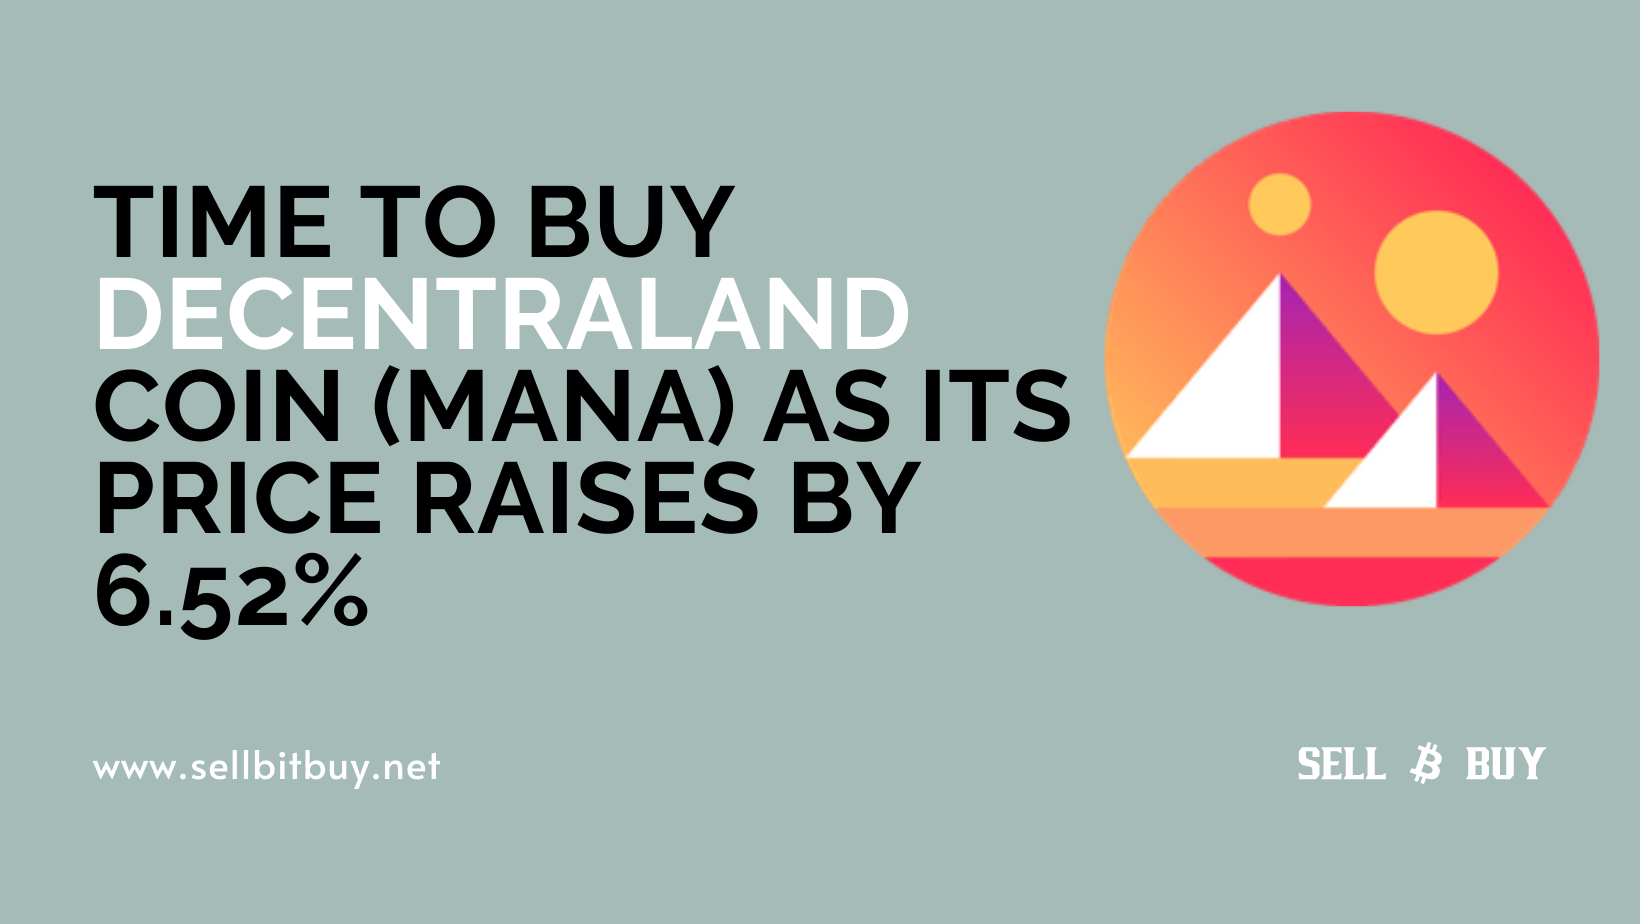 Article about Time To Buy Decentraland Coin (MANA) As Its Price Raises By 6.52%